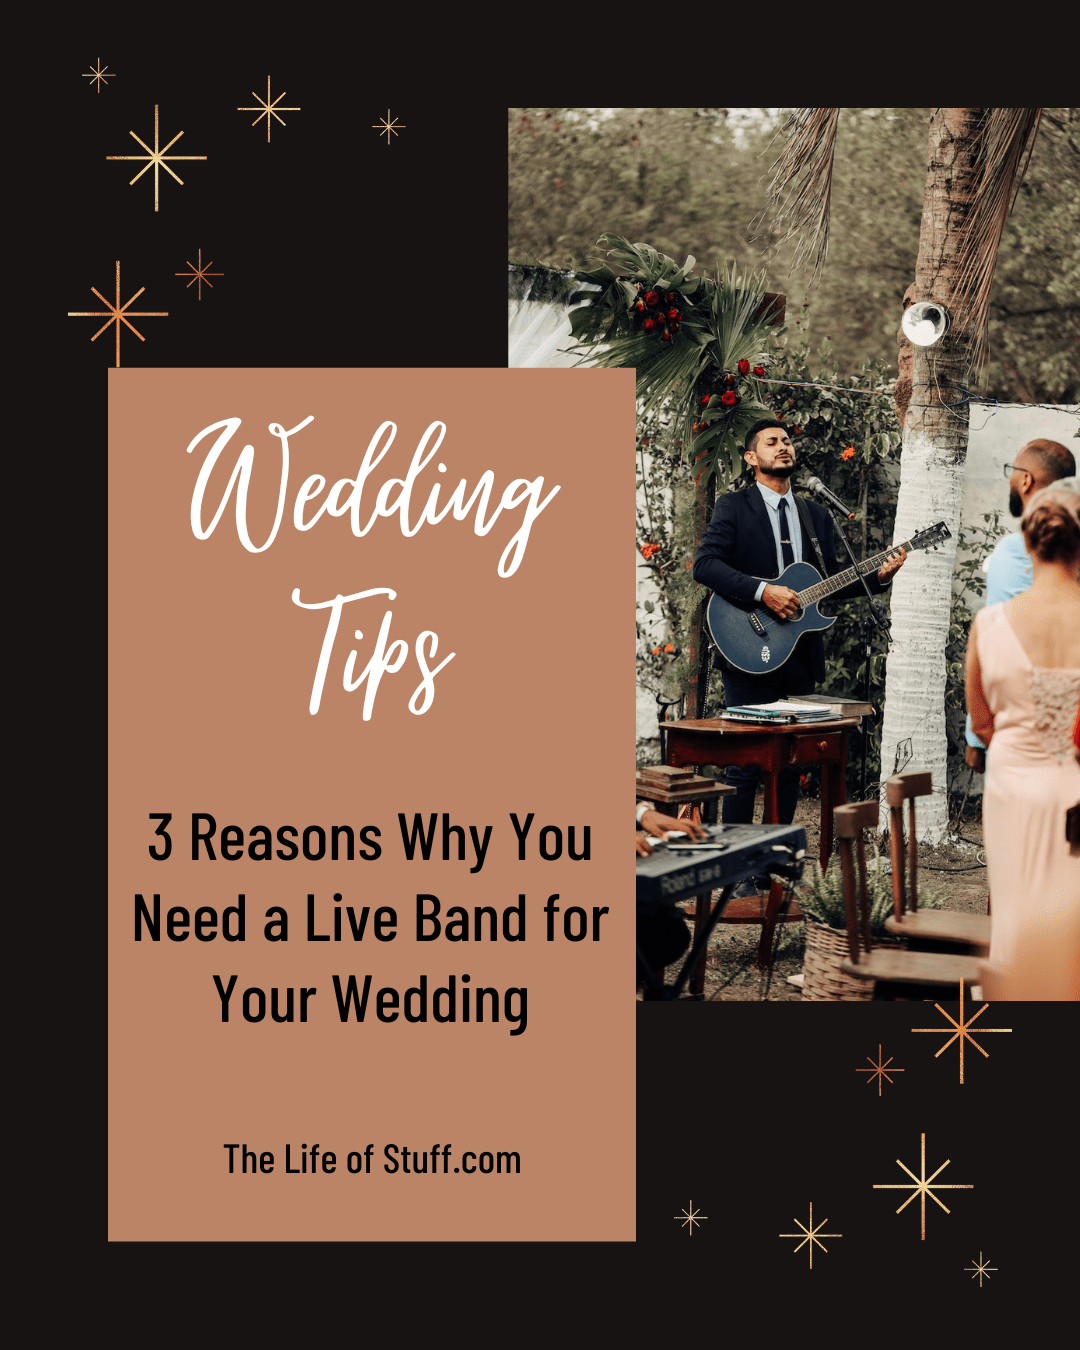 3 Reasons Why You Need a Live Band for Your Wedding - The Life of Stuff